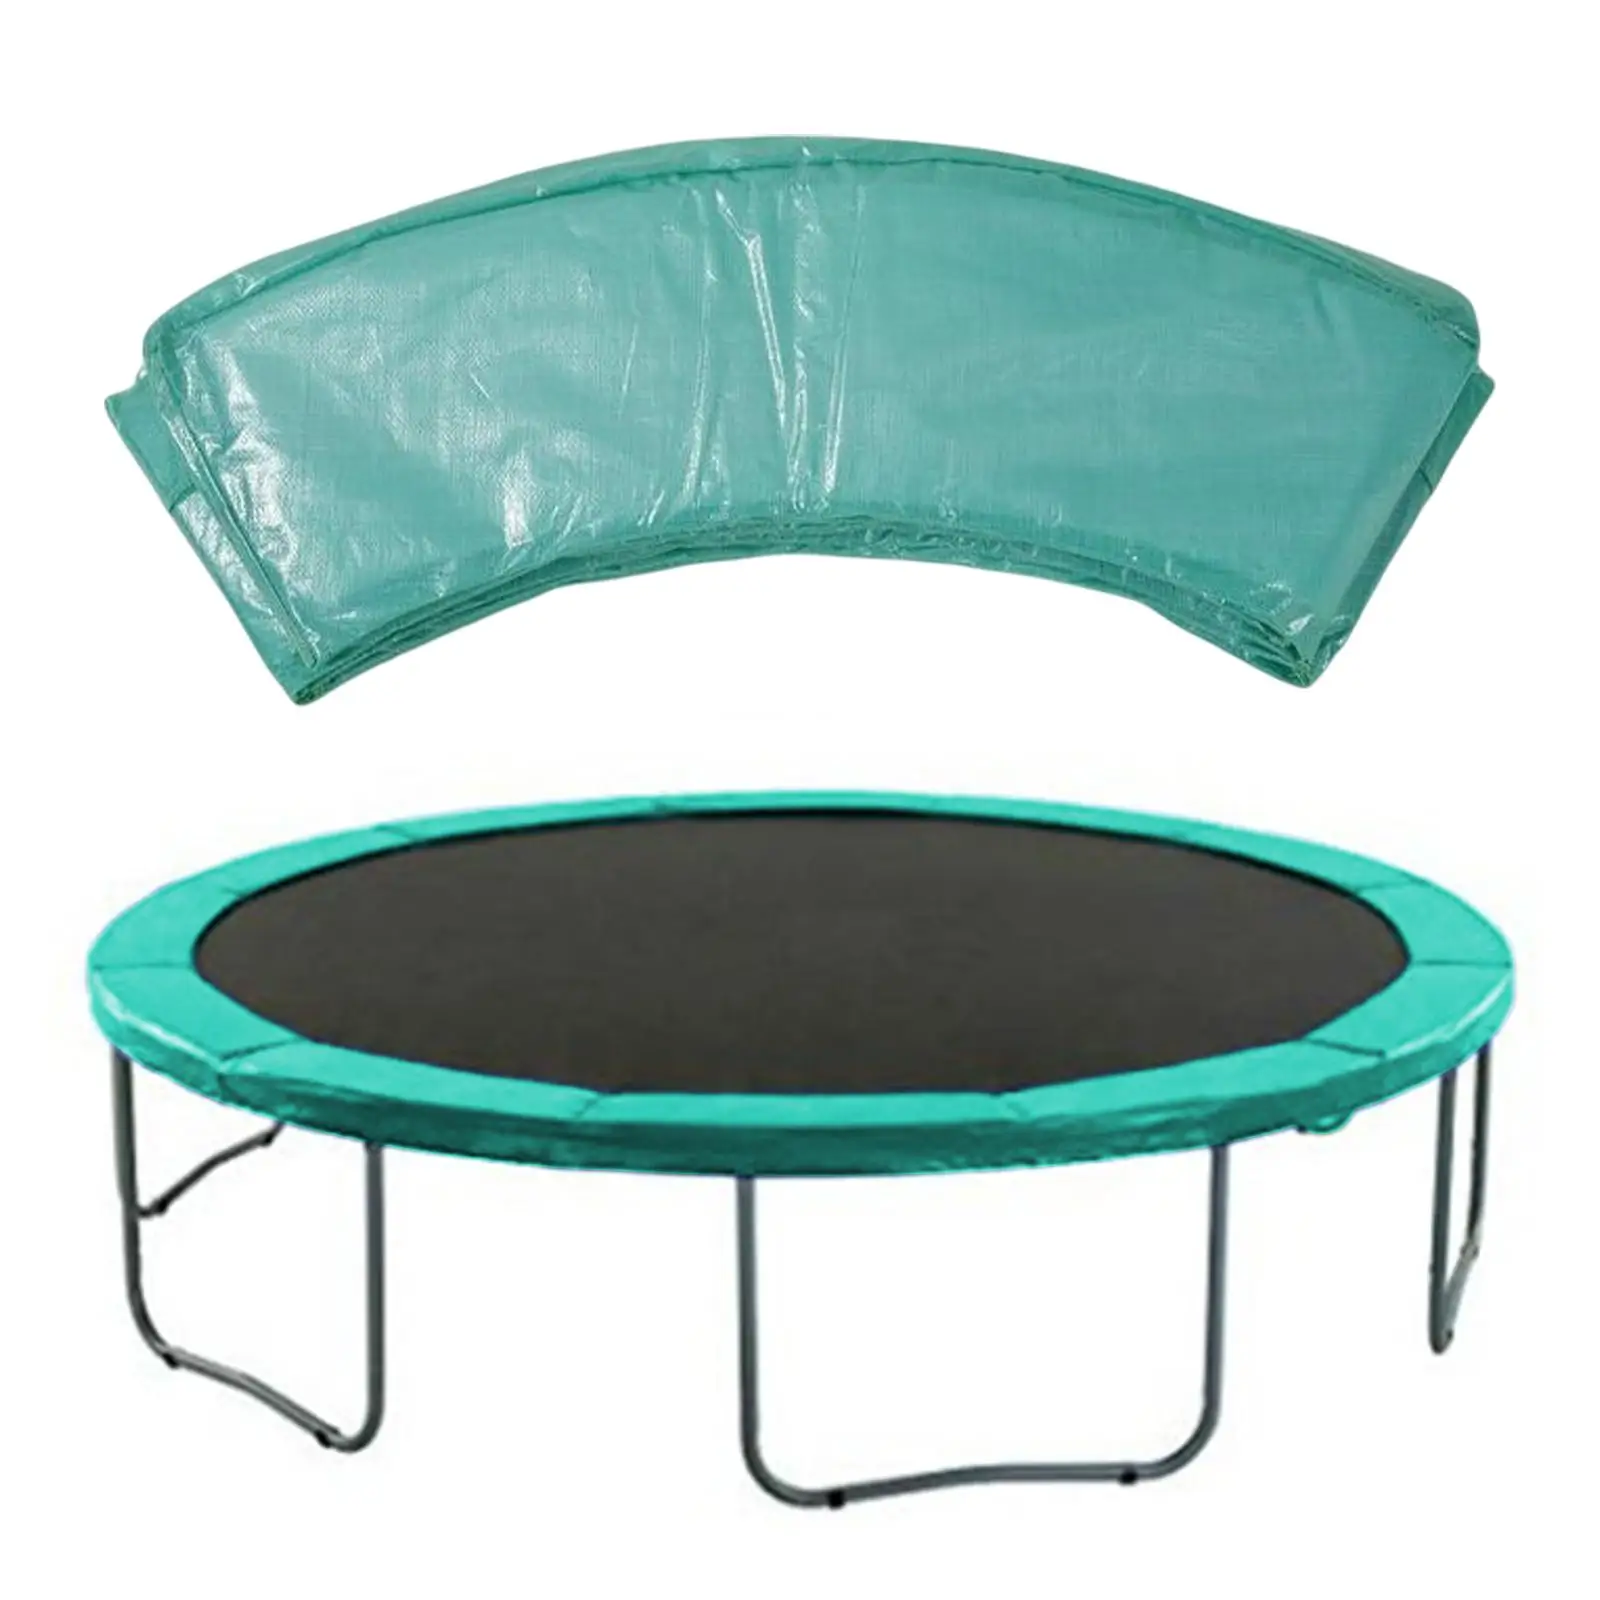 Trampoline Protection Mat,Spring Protection Cover, Edge Protector, Tear Resistant, Trampoline Edge Cover for Trampoline